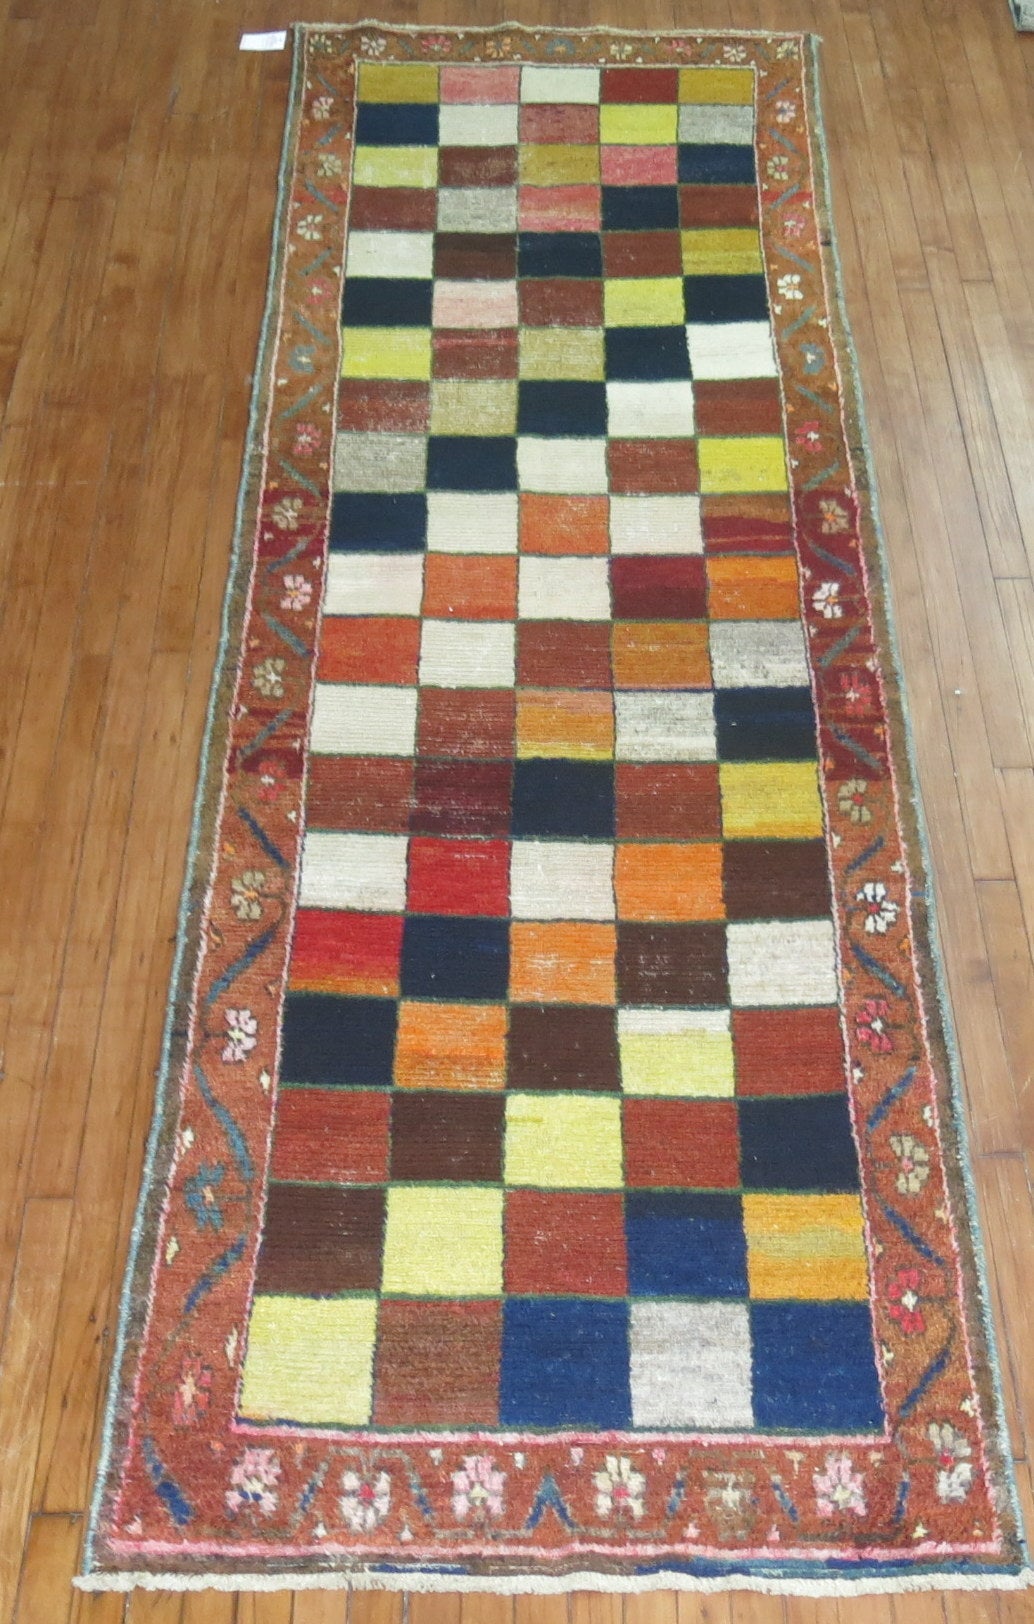 A 2nd quatrer of the 20th century Persian Gabbeh Runner

rug no. 30419
Size 3' 4